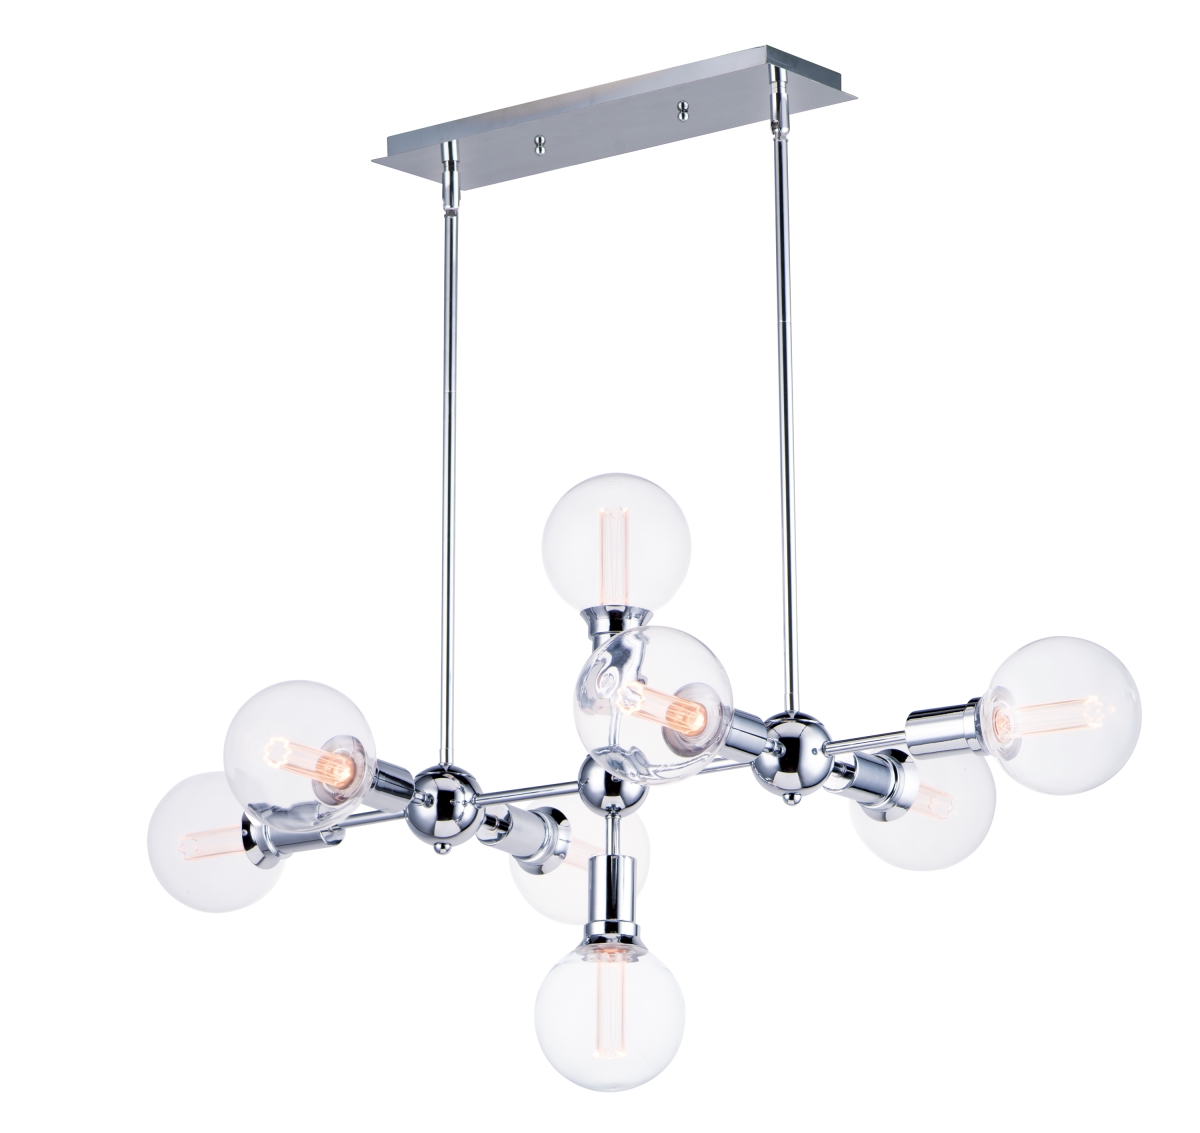 11348pc-bul-g40-cl 39 In. Molecule Eight-light Pendant Ceiling With G40 Cl Led Bulb, Polished Chrome